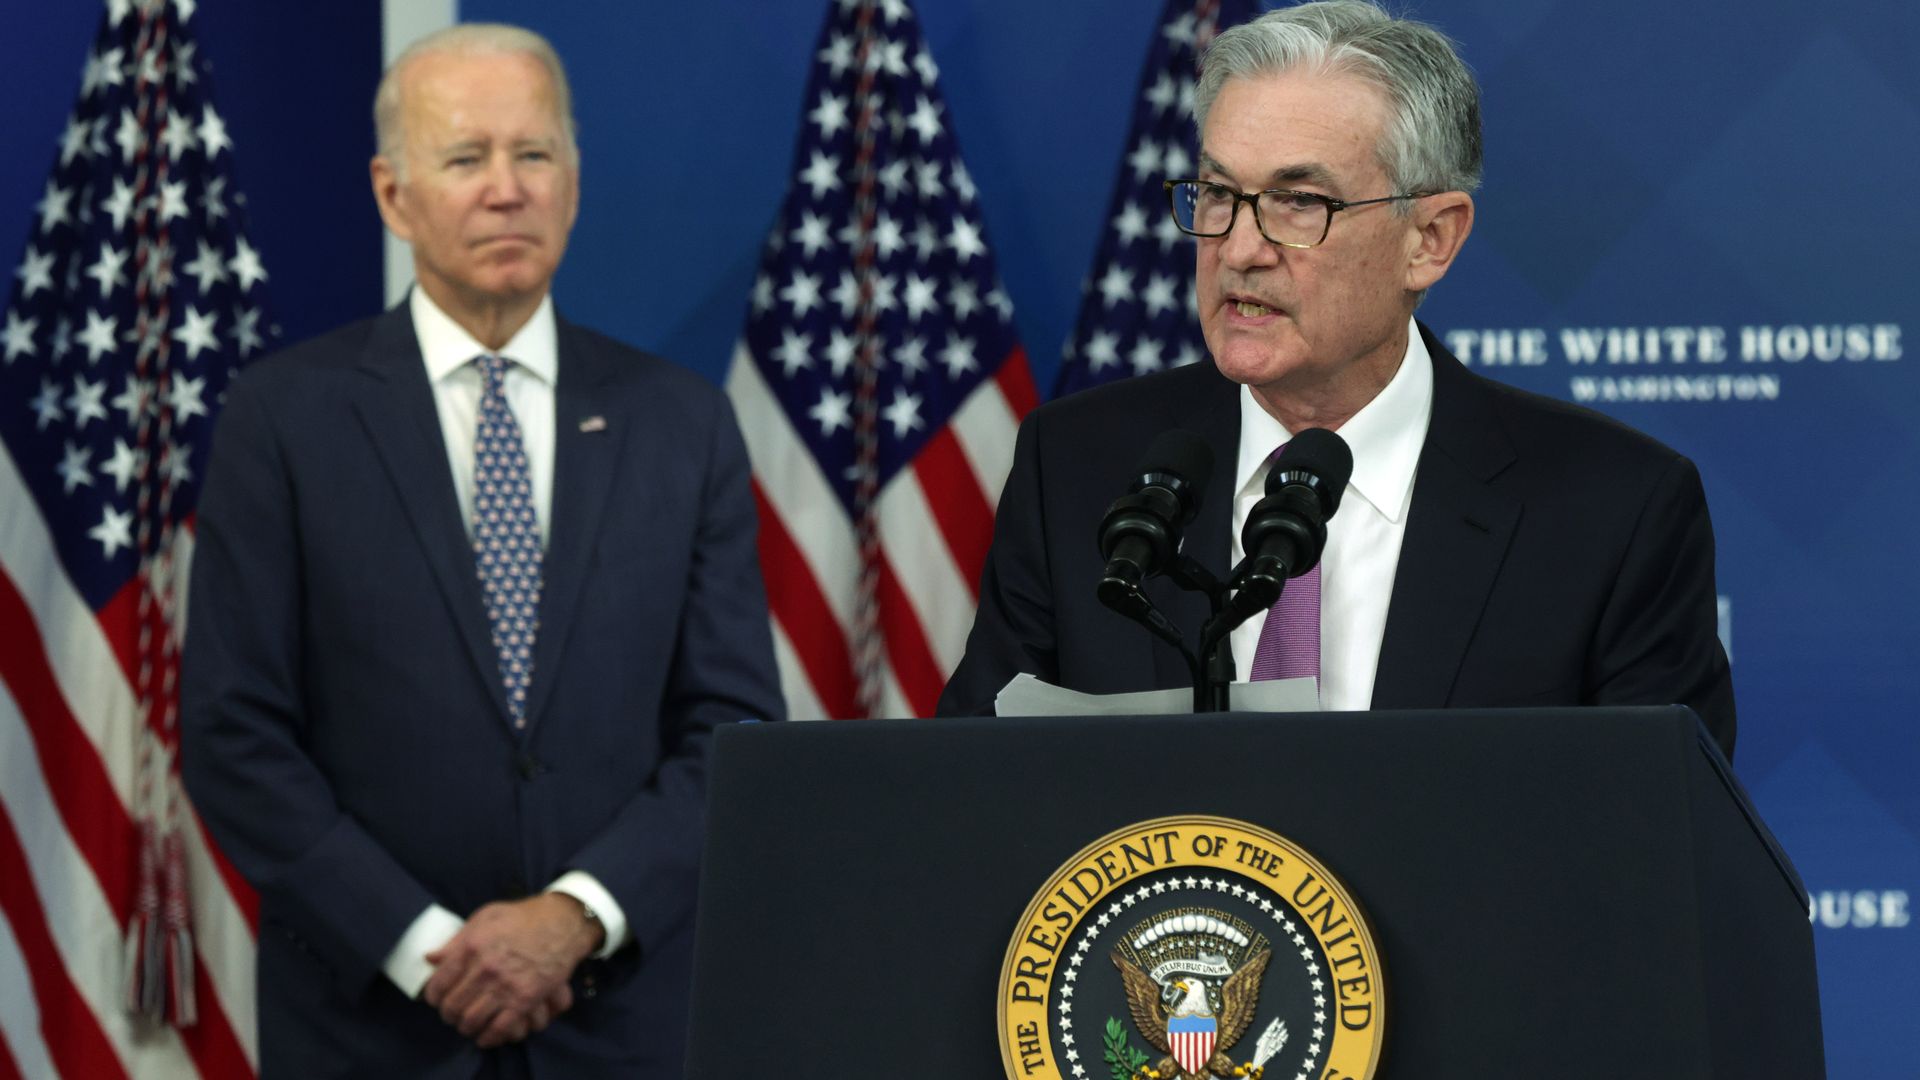 Federal Reserve Chair Jerome Powell and President Biden